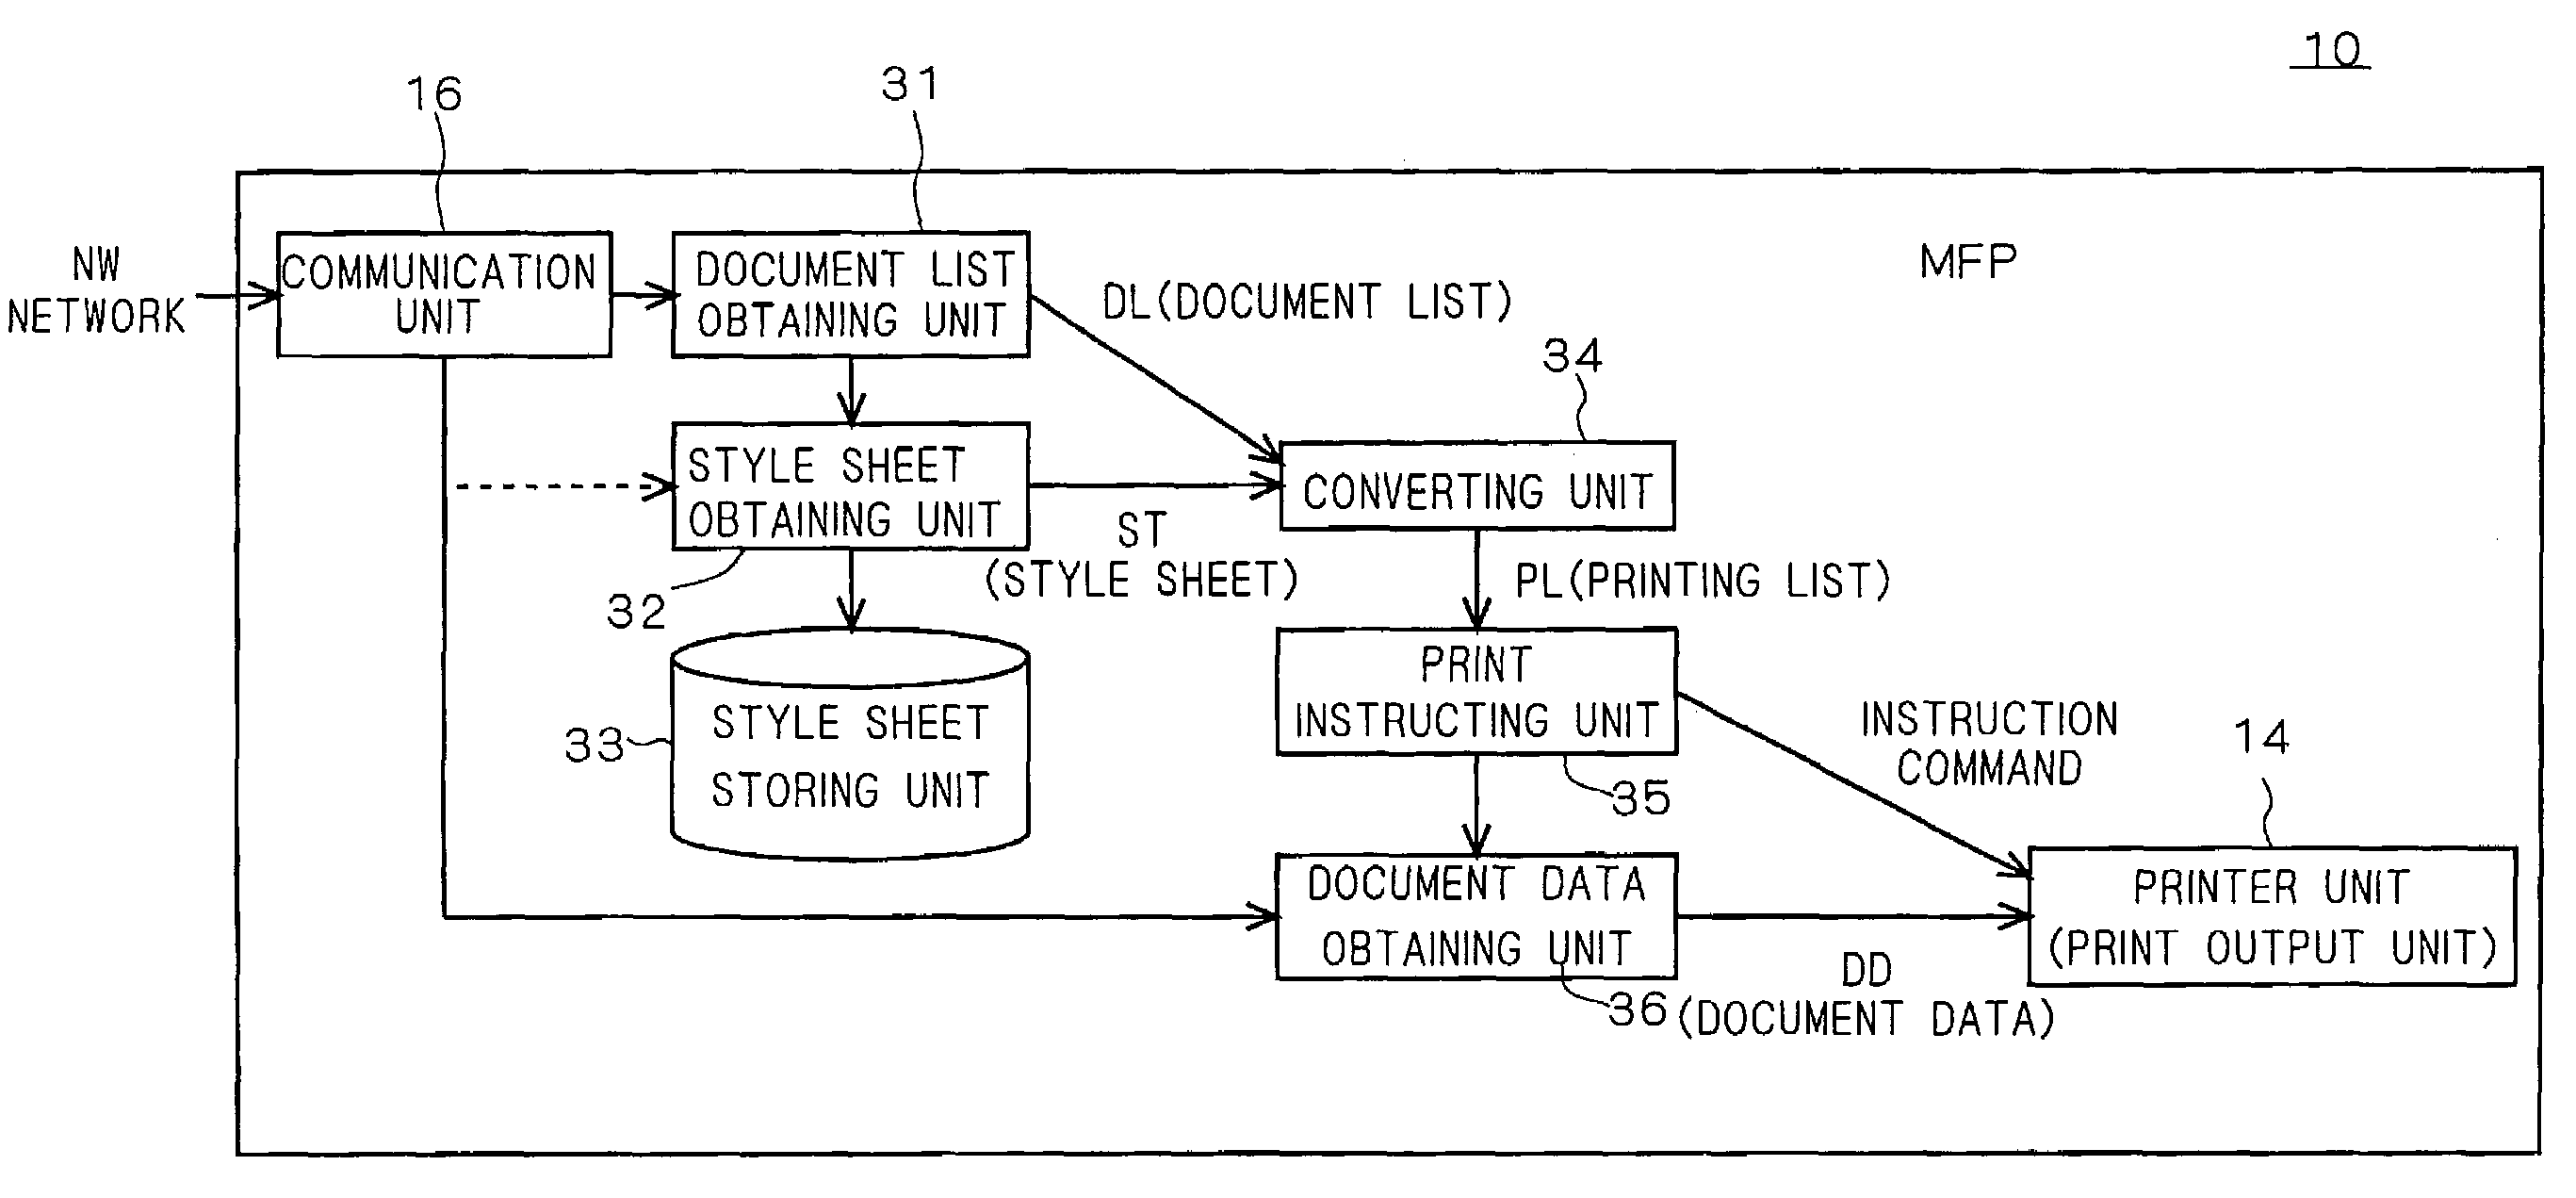 Print control apparatus, method and program using a tag of a document list for printing a plurality of documents in various formats